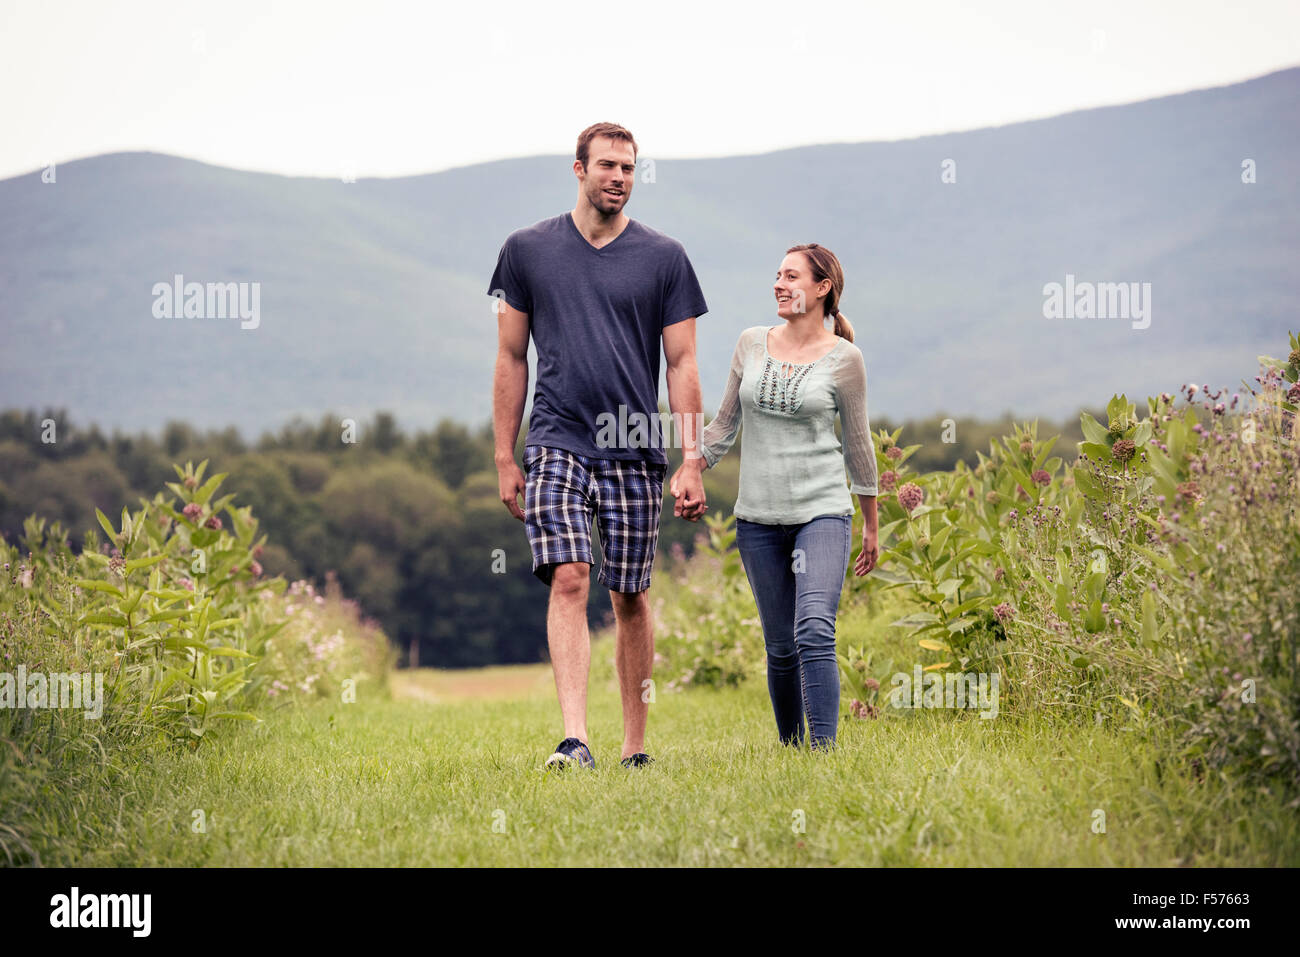 A couple, man and woman walking through a meadow holding hands. Stock Photo